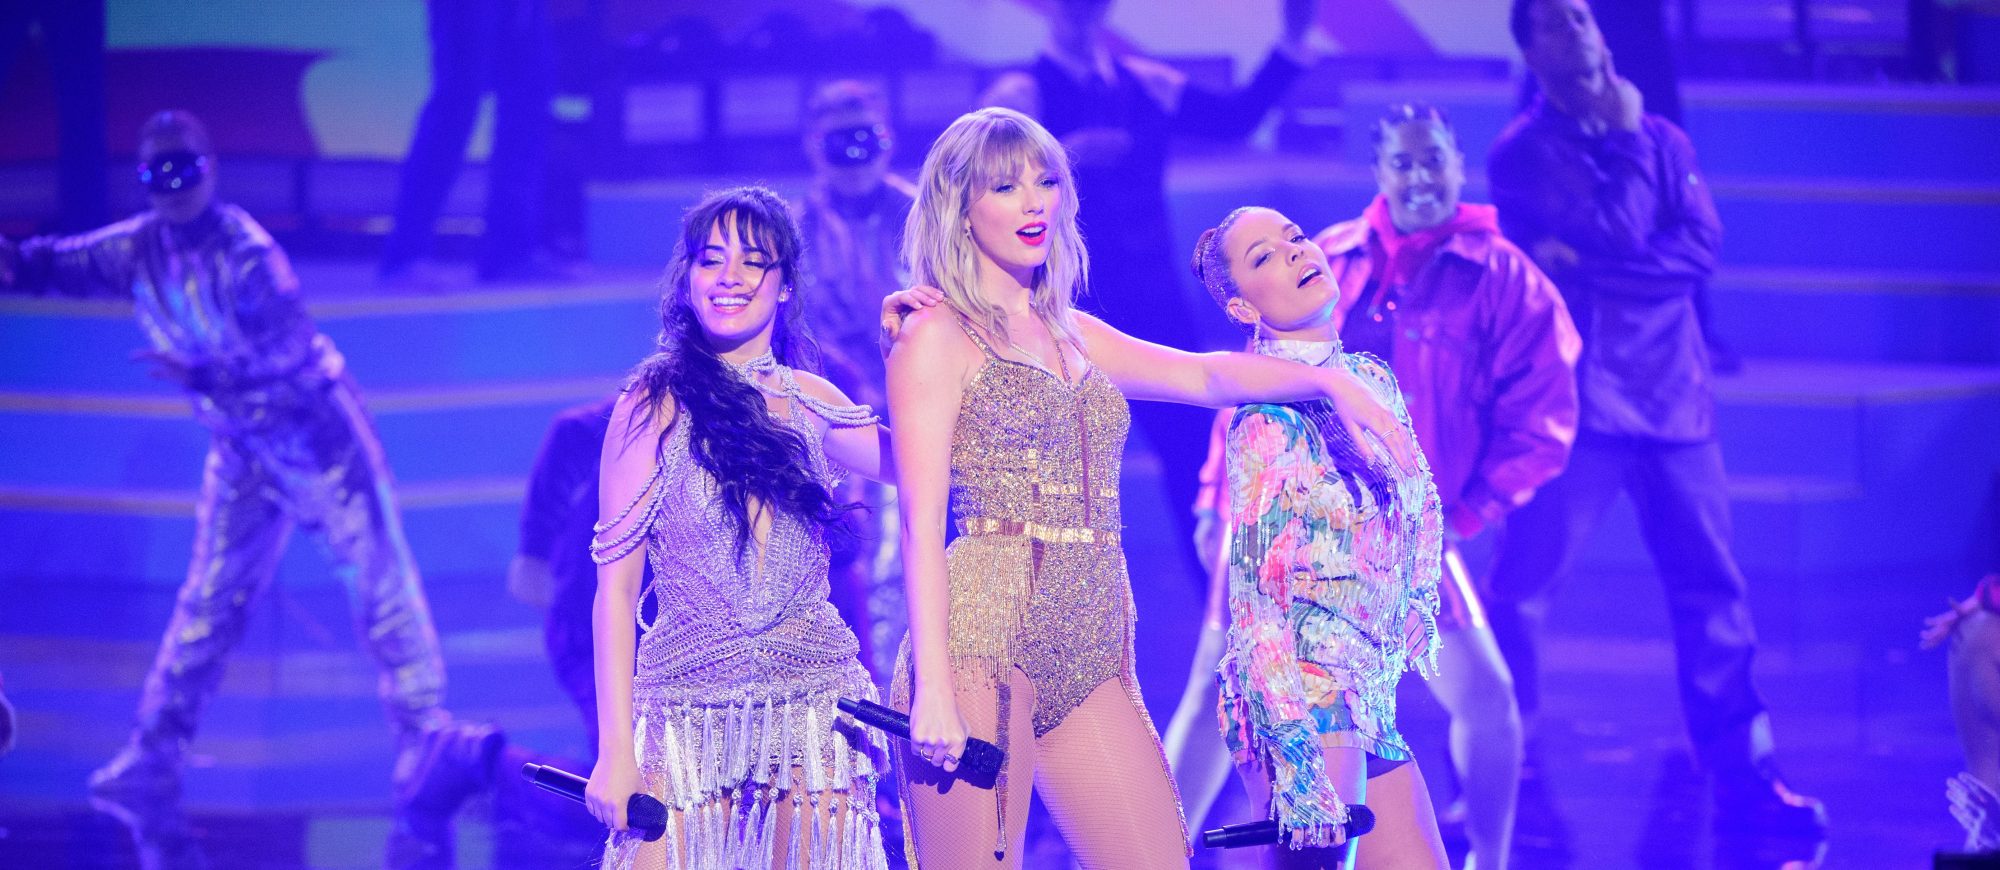 2019 American Music Awards Show Was Magical For Taylor Swift